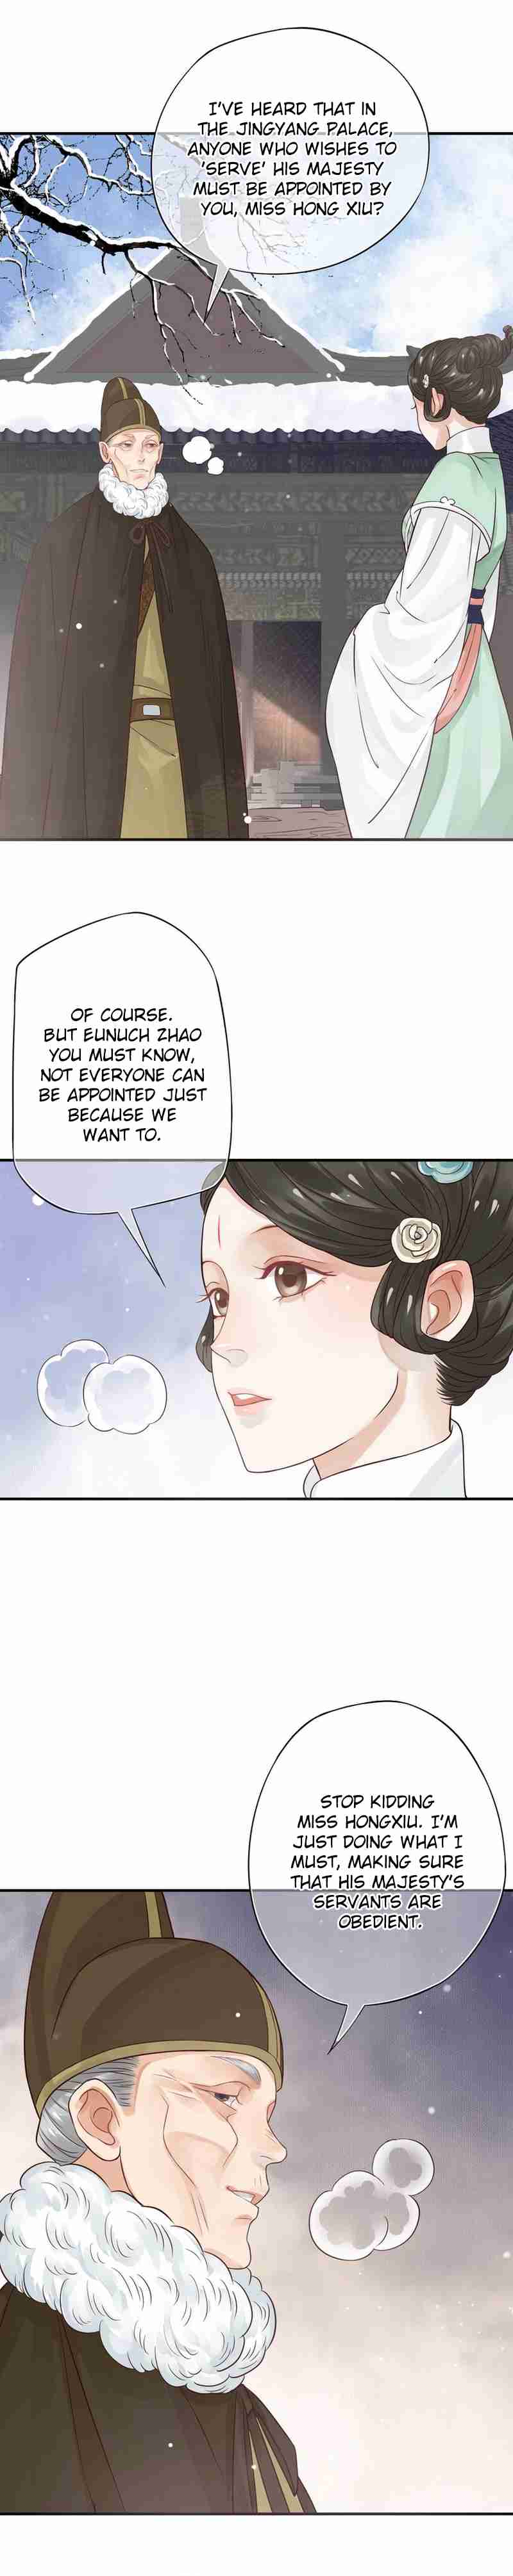 To Be Or Not To Be Ch. 11 The emperor's Request?